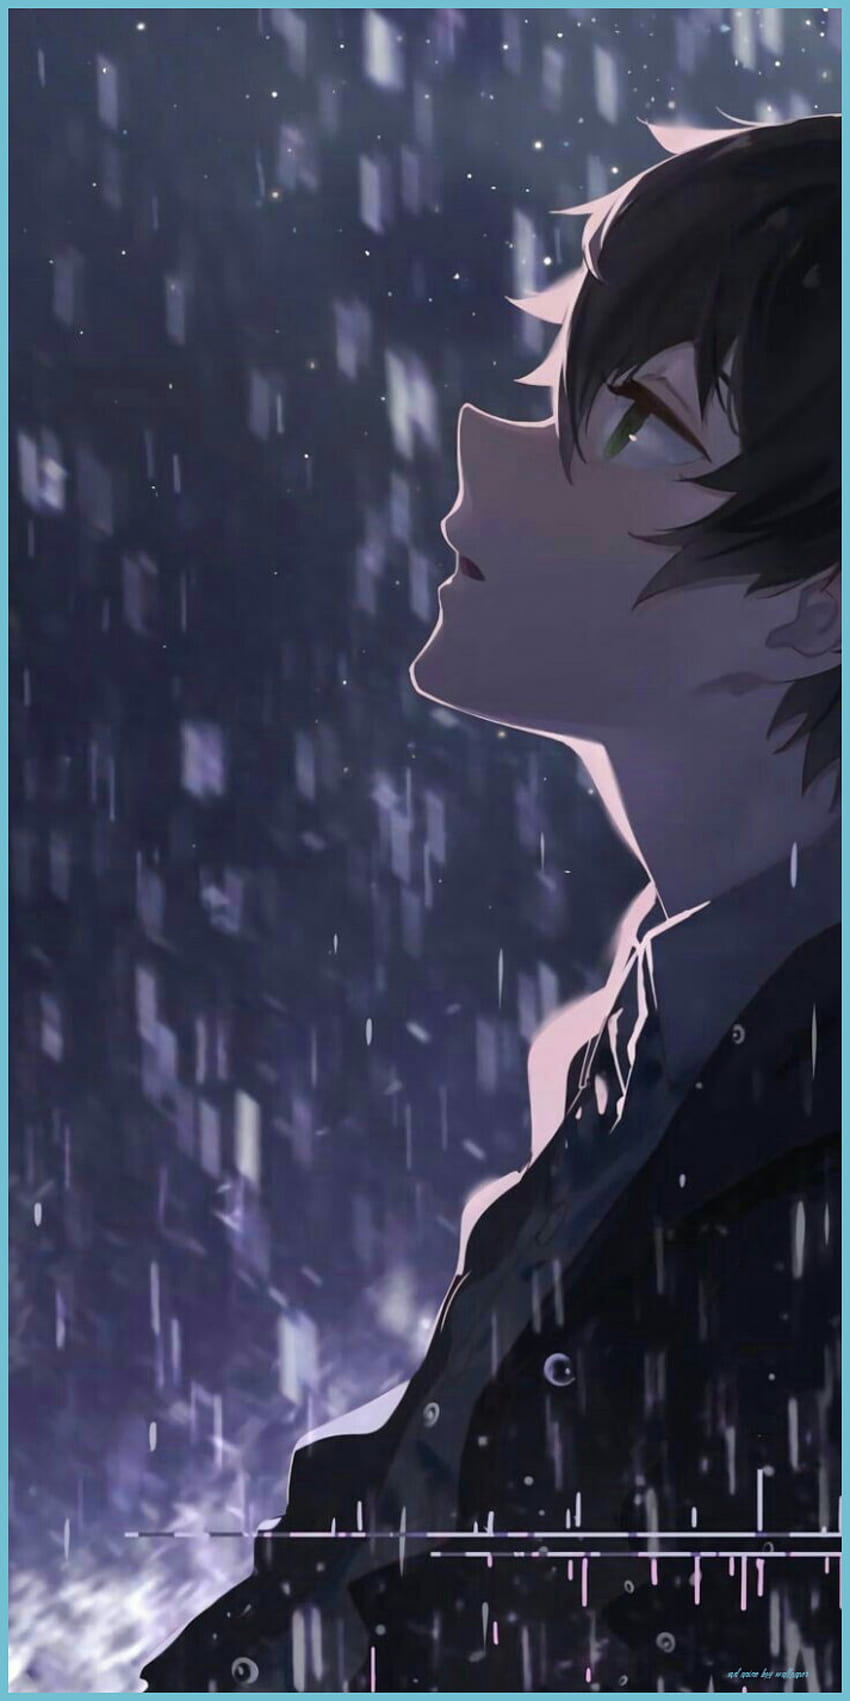 3+ Depressed Anime Wallpapers for iPhone and Android by Ronald Martin